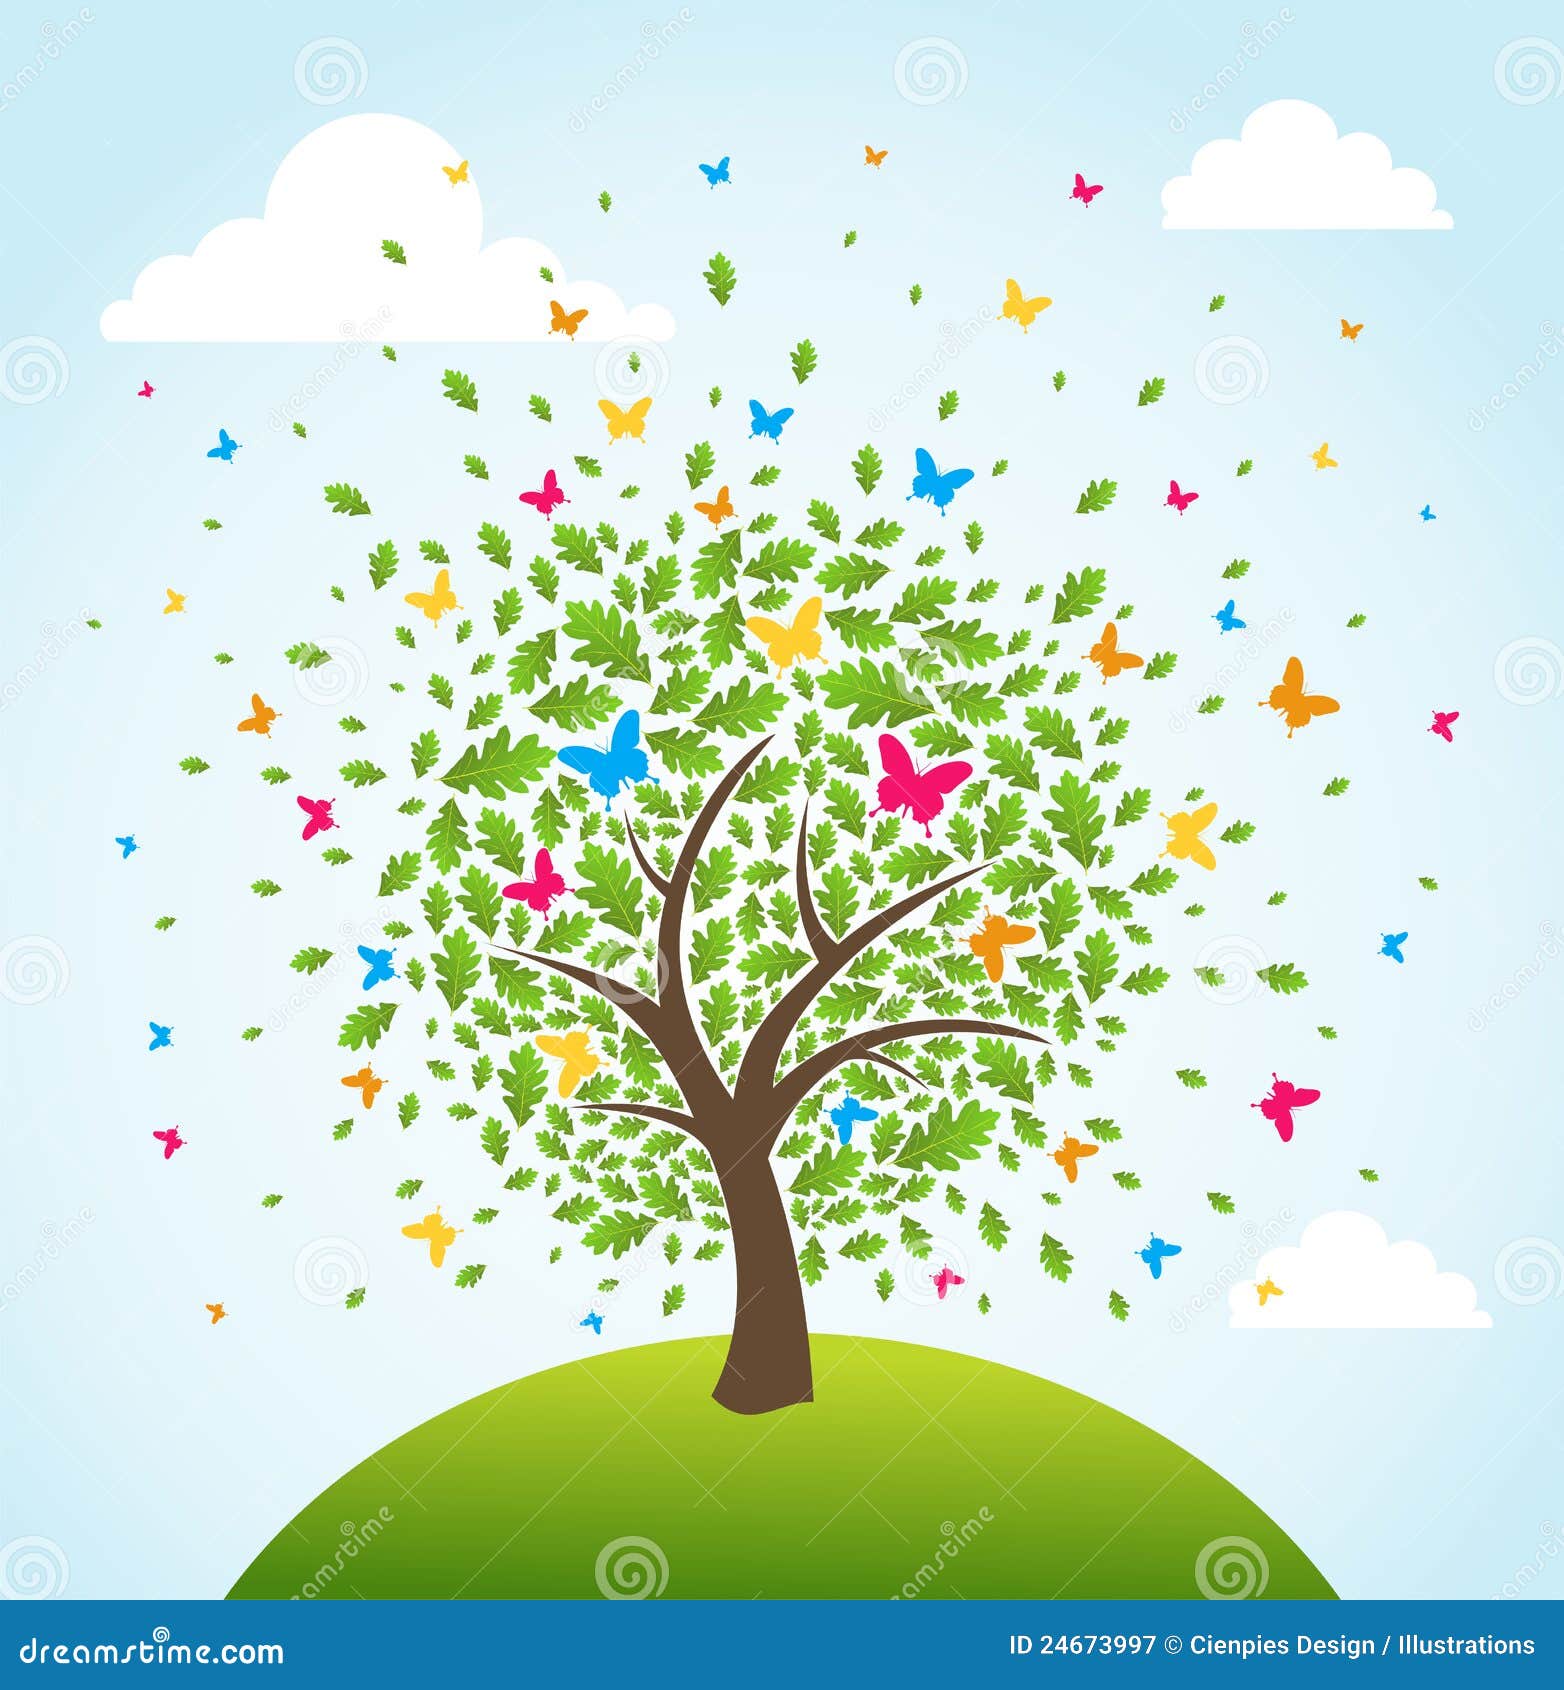 Abstract spring time tree stock vector. Image of environment - 24673997